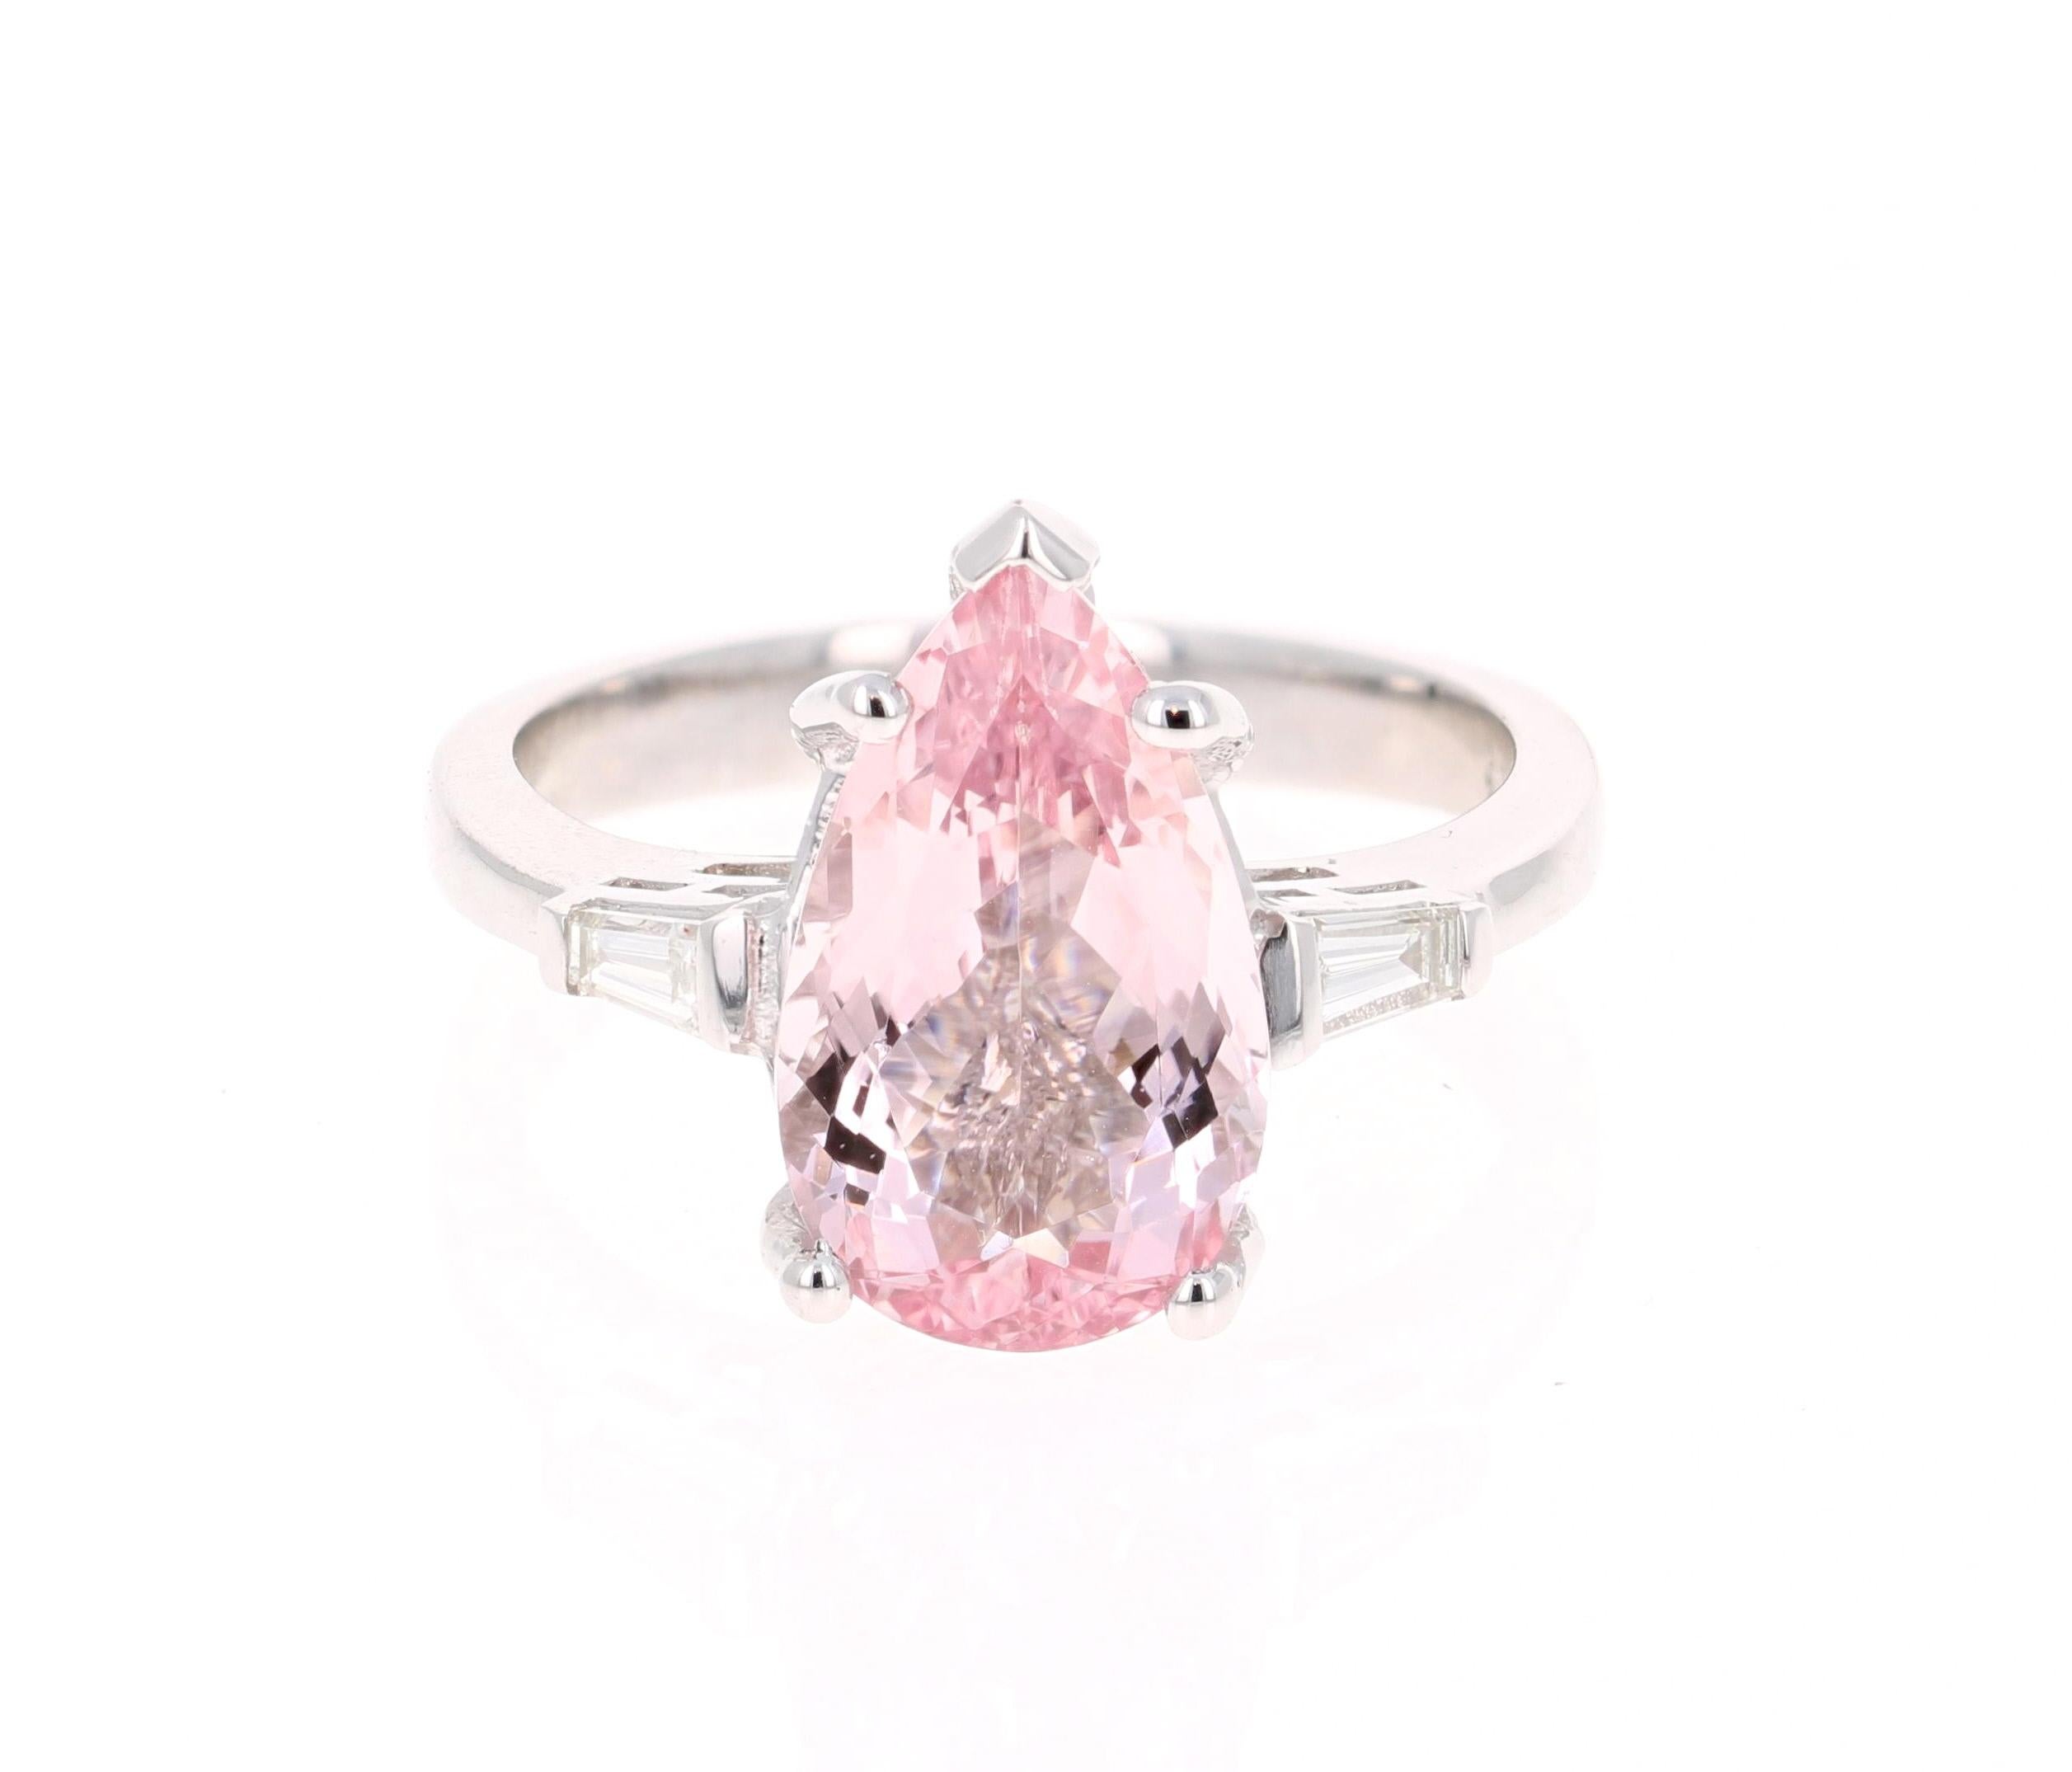 A lovely Engagement Ring Option or as an alternate to a Pink Diamond Ring! 

This gorgeous and classy Morganite and Diamond Ring has a 3.68 Carat Pear Cut Pink Morganite and has 2 Baguette Cut Diamonds that weigh 0.22 carats (Clarity: VS2, Color: